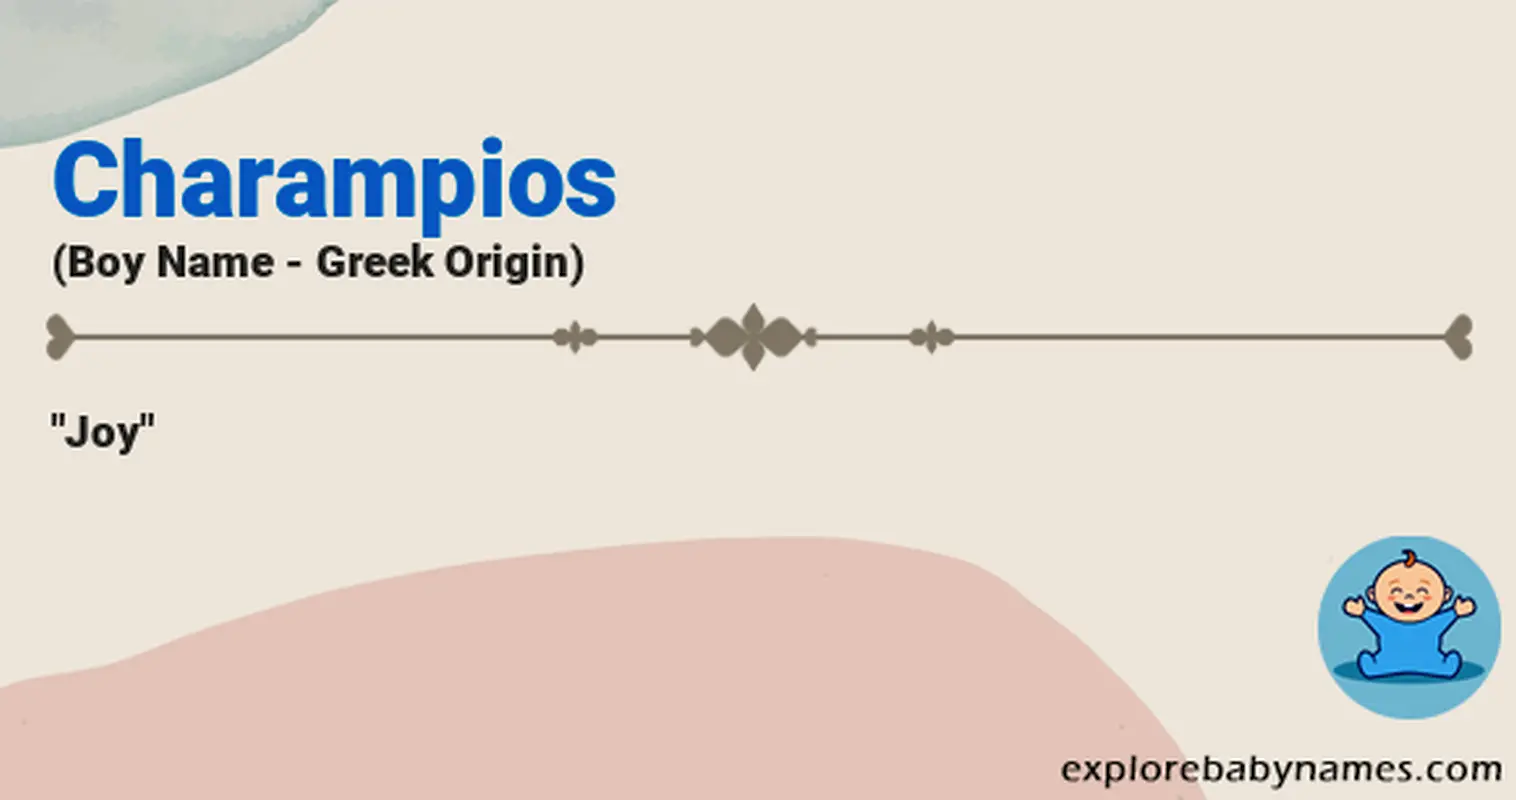 Meaning of Charampios